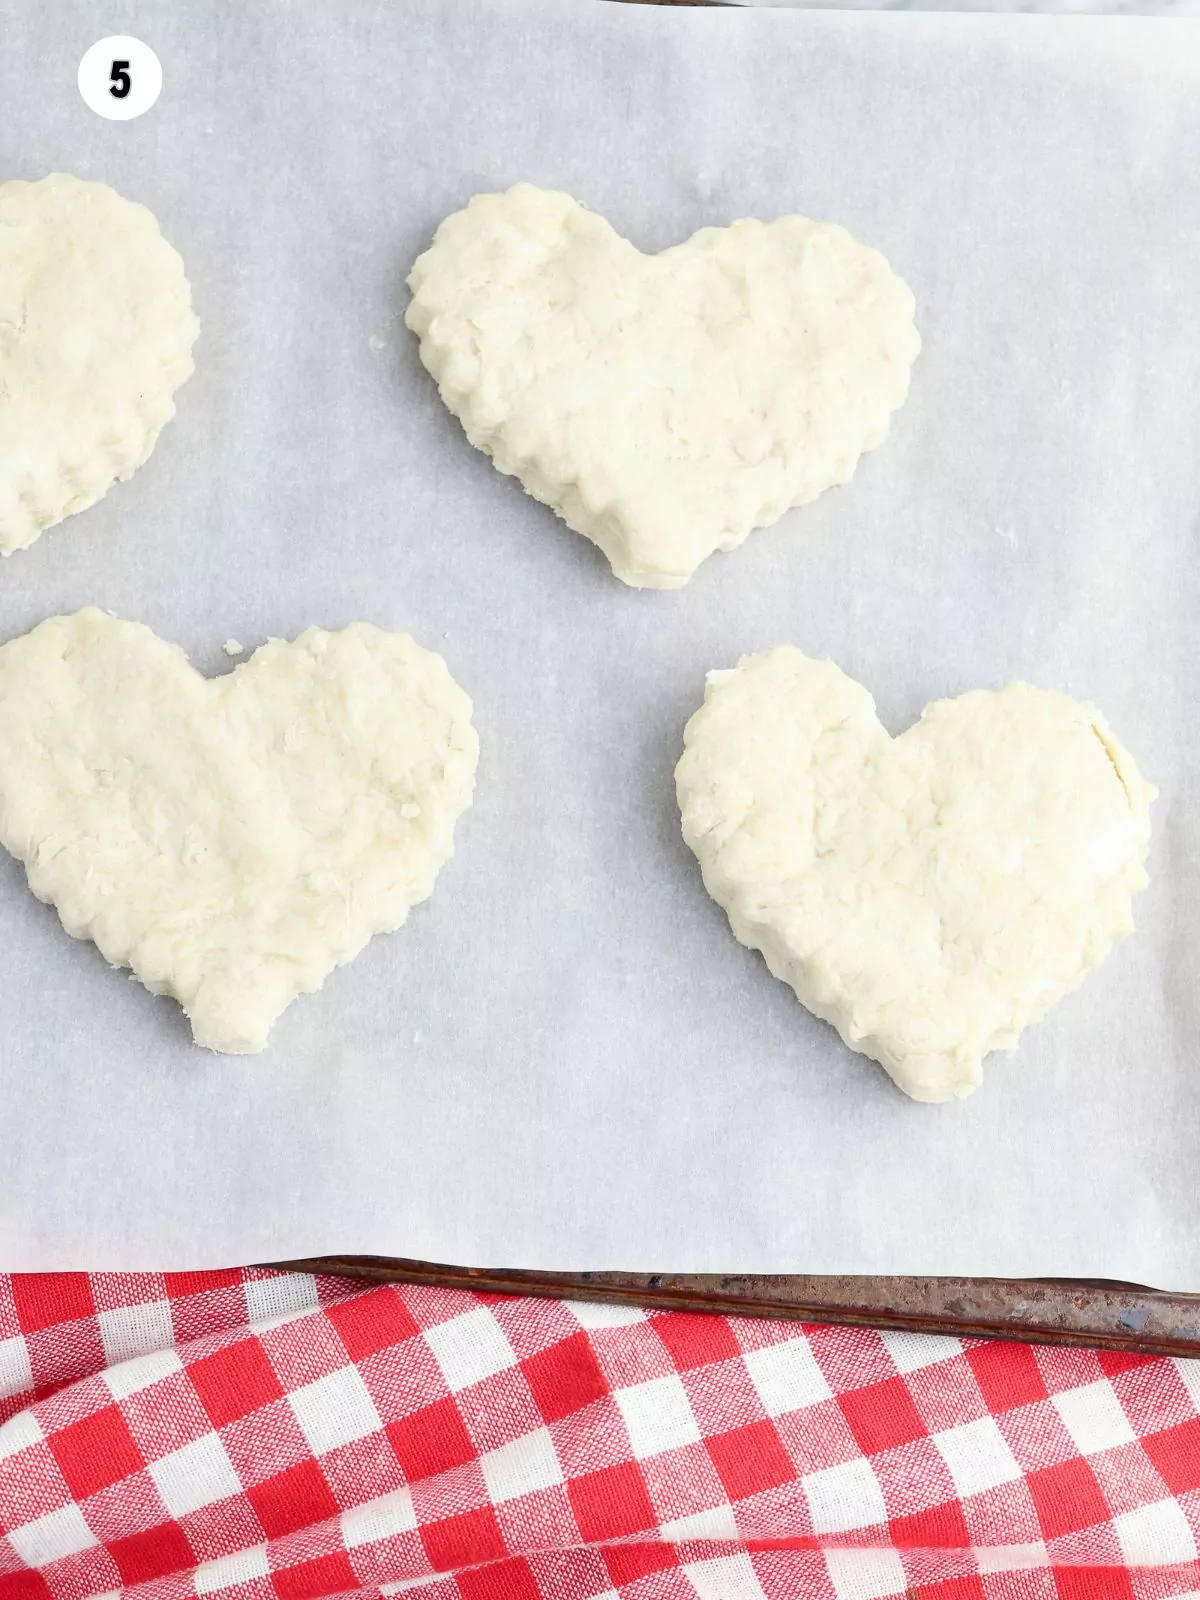 heart shaped biscuits on parchment lined baking sheet.